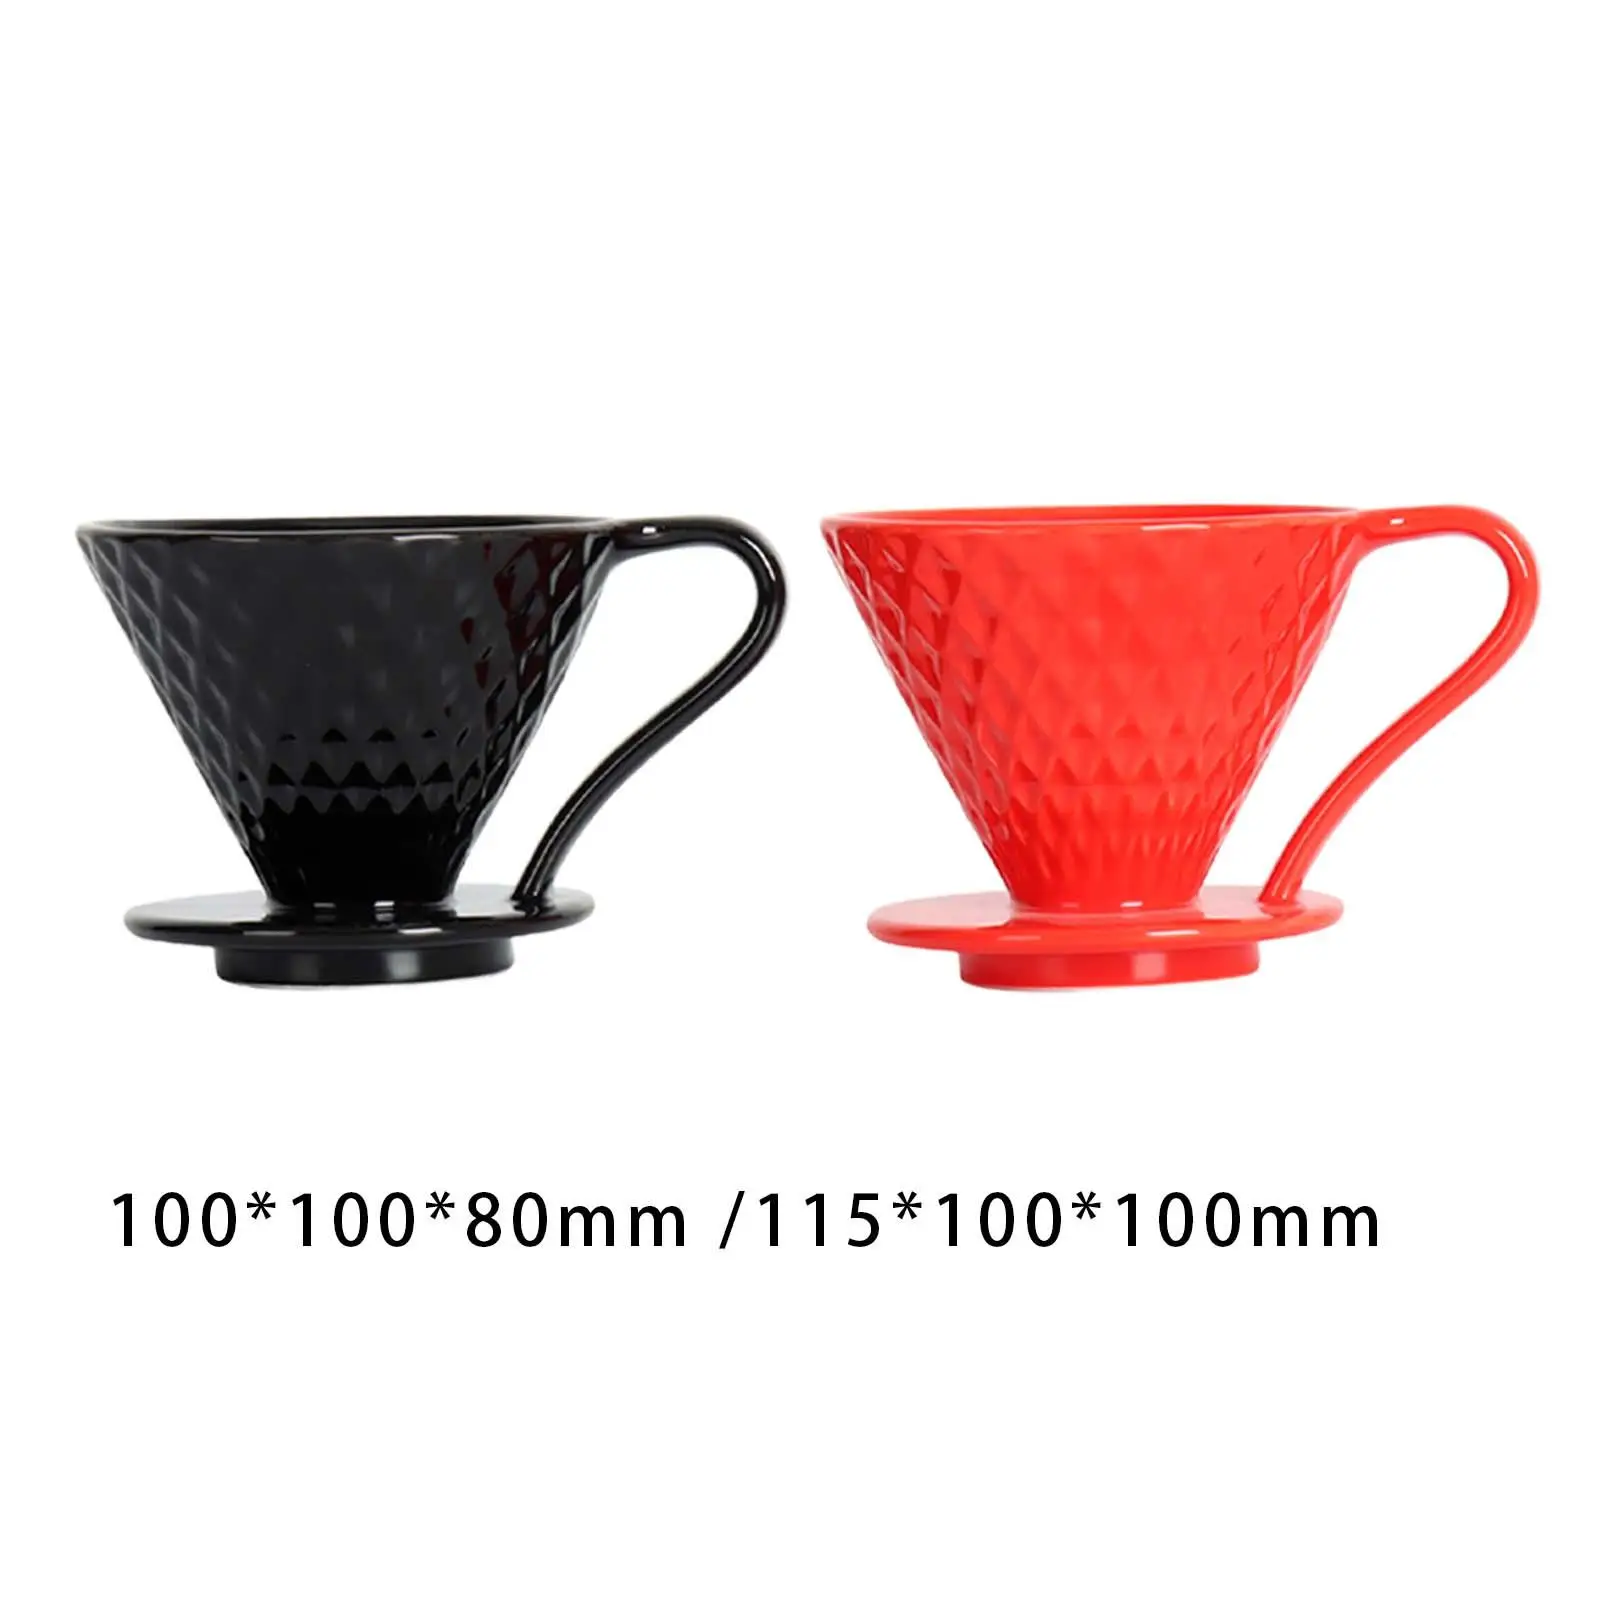 Coffee Filter Coffee Filters Ceramic Reusable Durable Pour over Coffee Filter Coffee Filter for Office Home